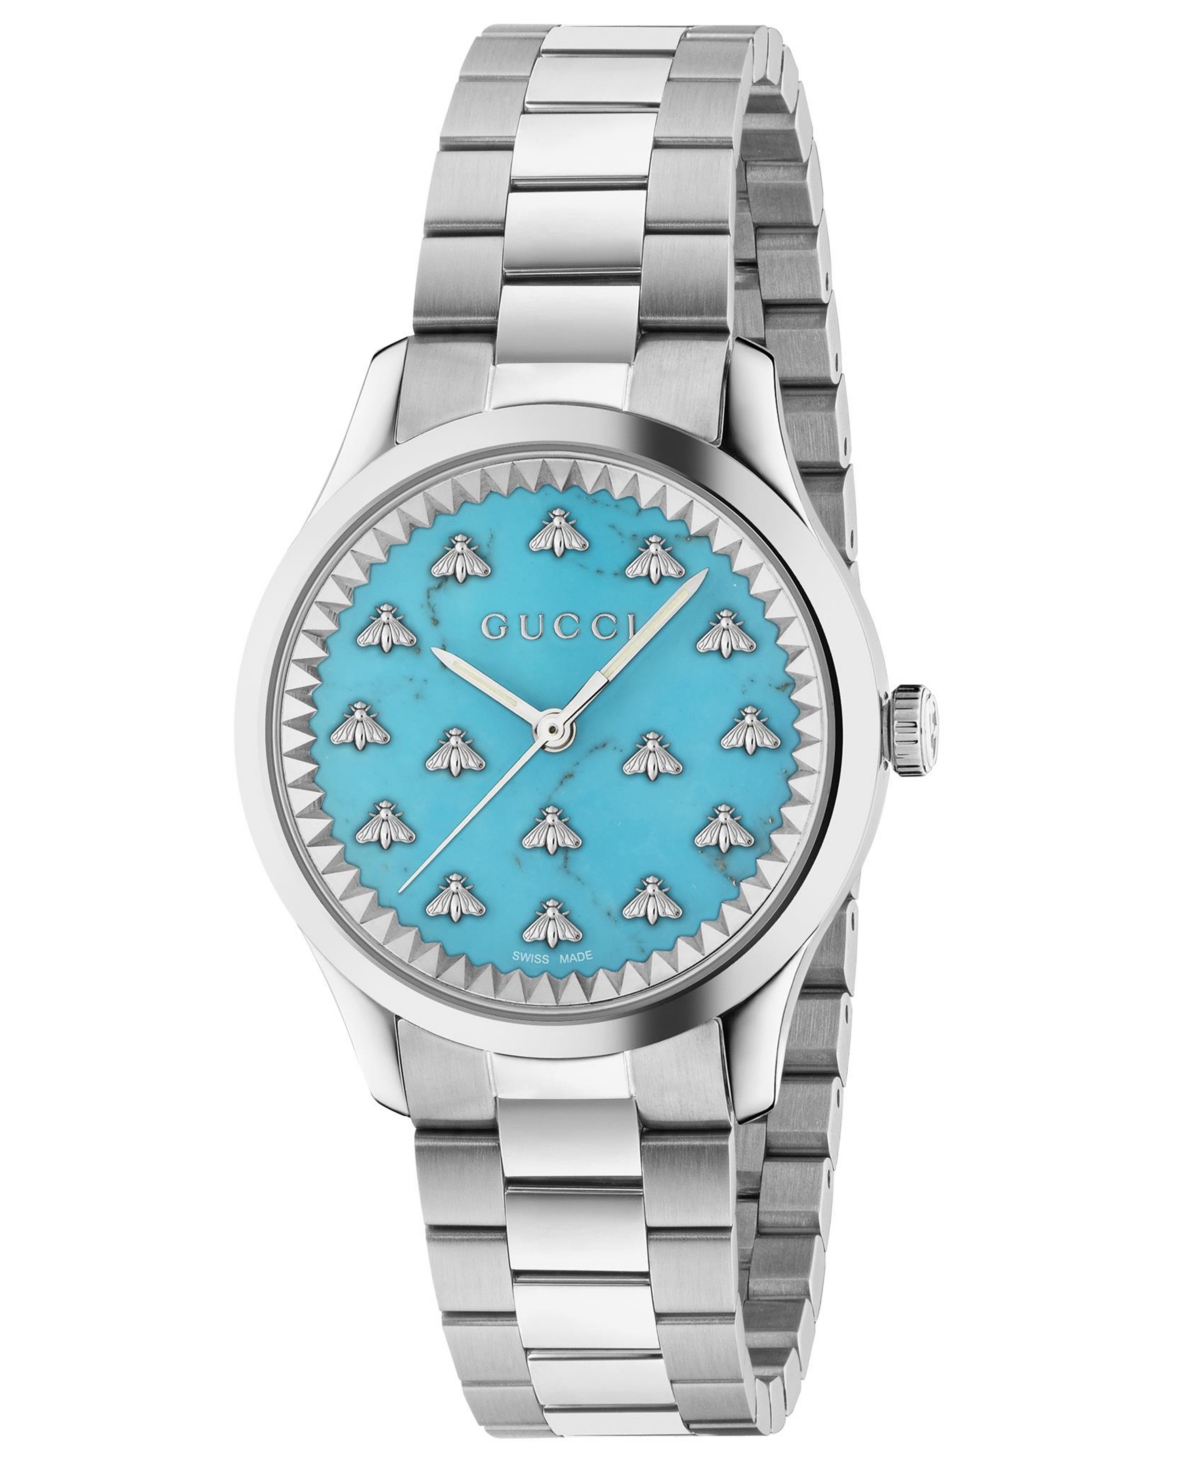 Gucci Signature Bee Automatic Bracelet Watch With Turquoise Dial